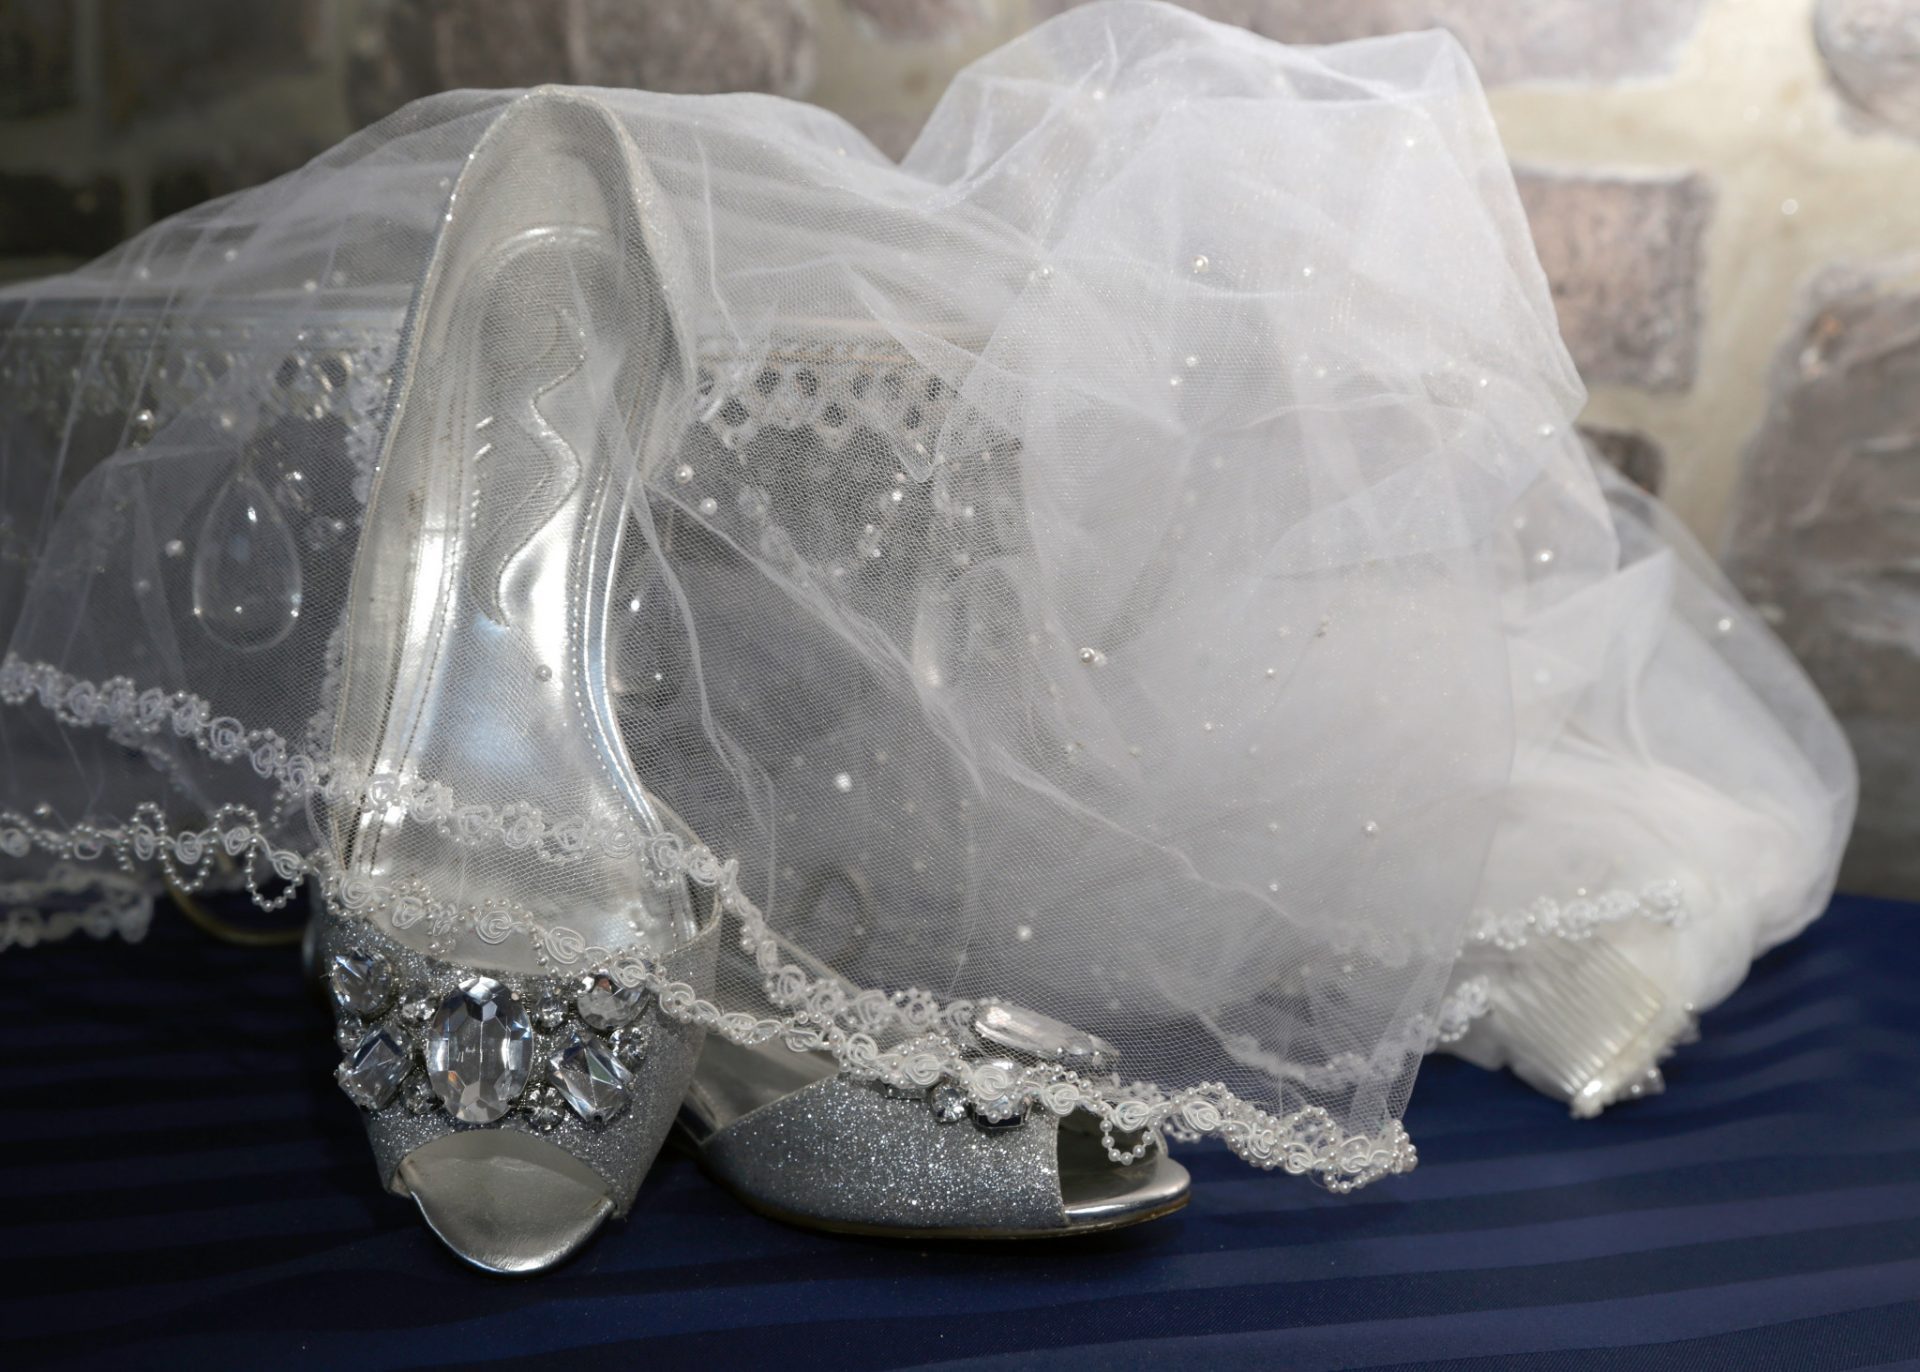 Kristin's veil and wedding shoes before her outdoor wedding